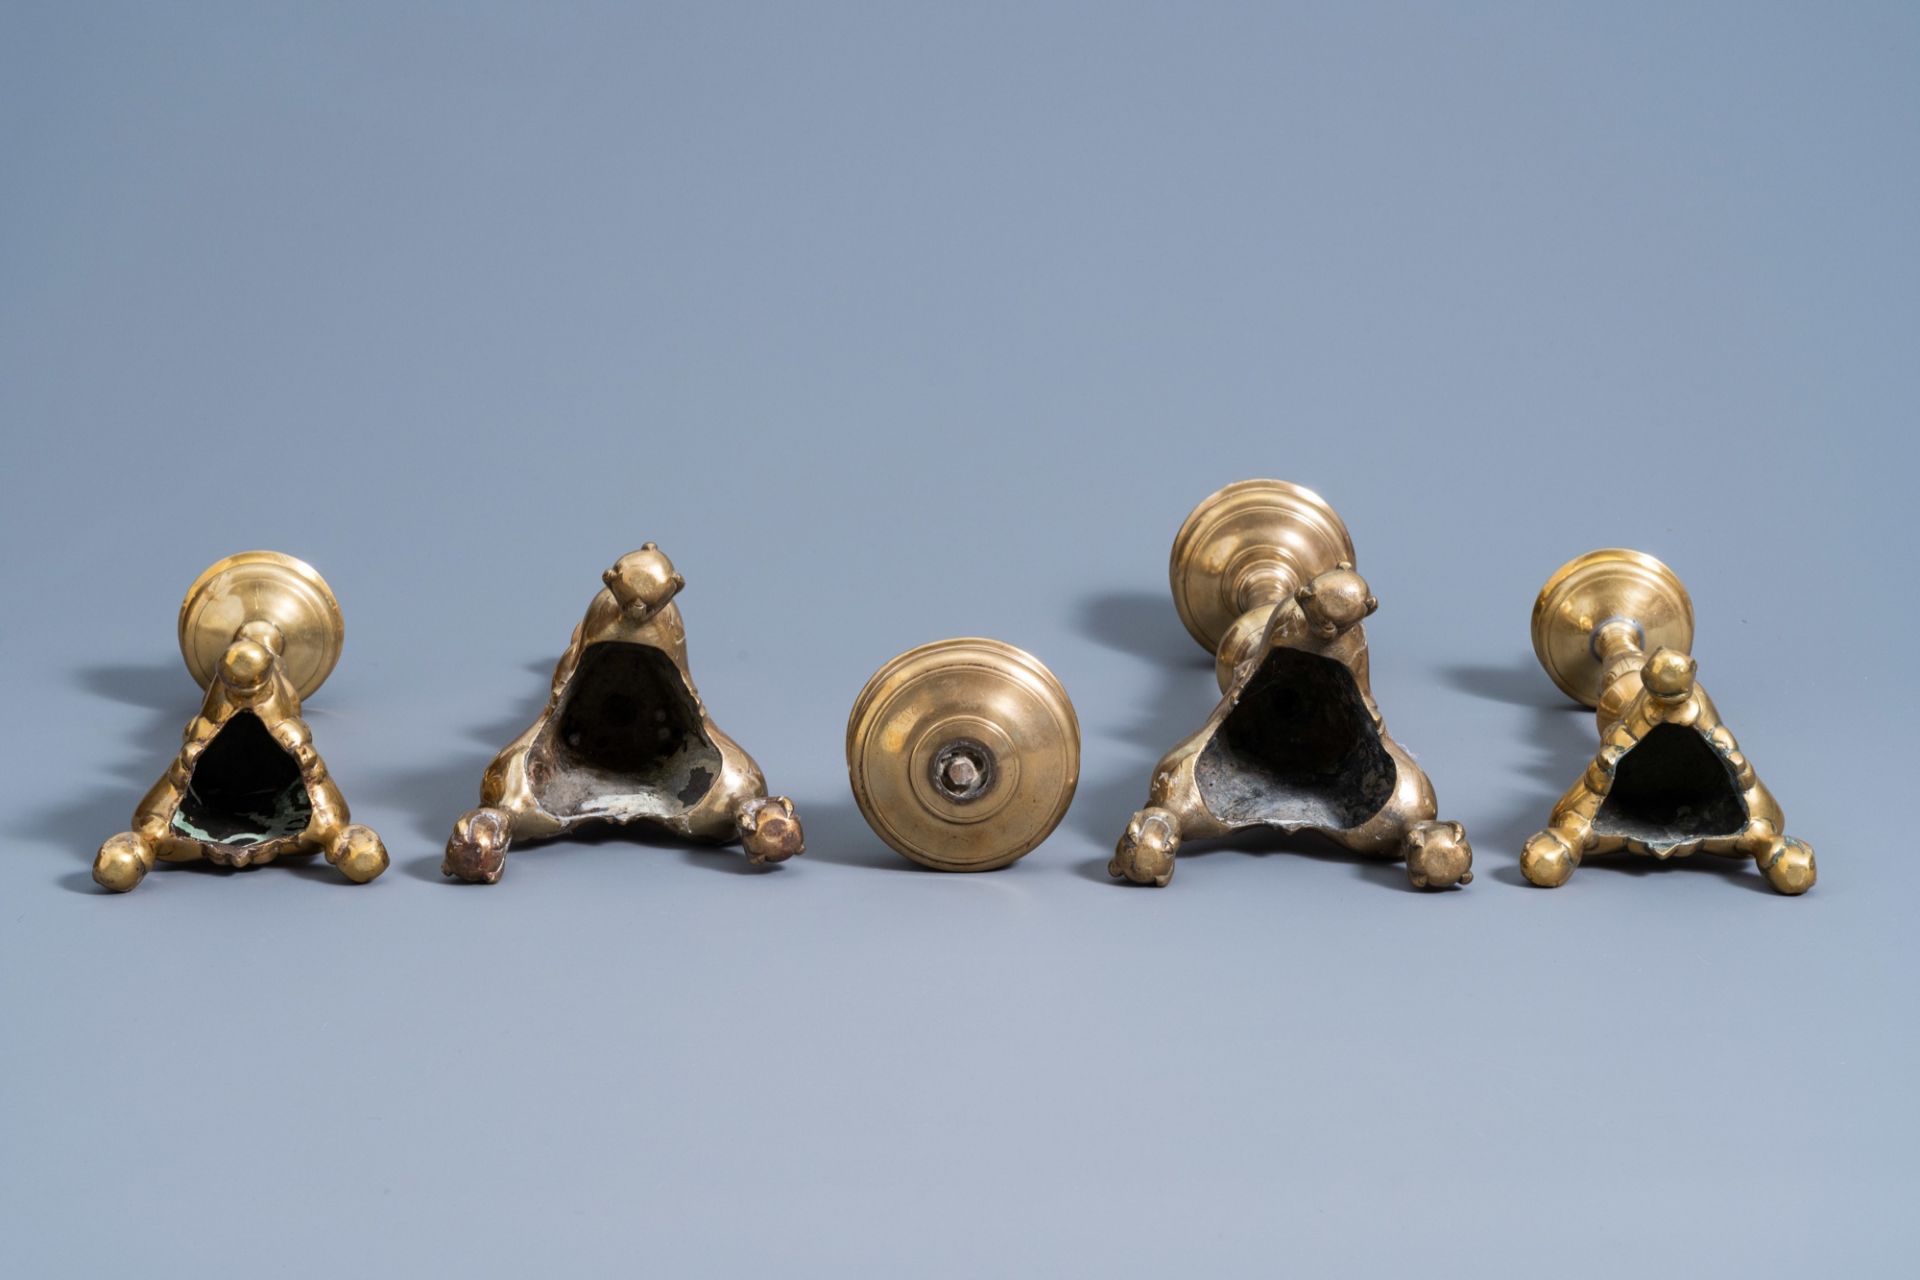 Two pairs of bronze pricket candlesticks, Flanders or The Netherlands, 17th C. - Image 7 of 7